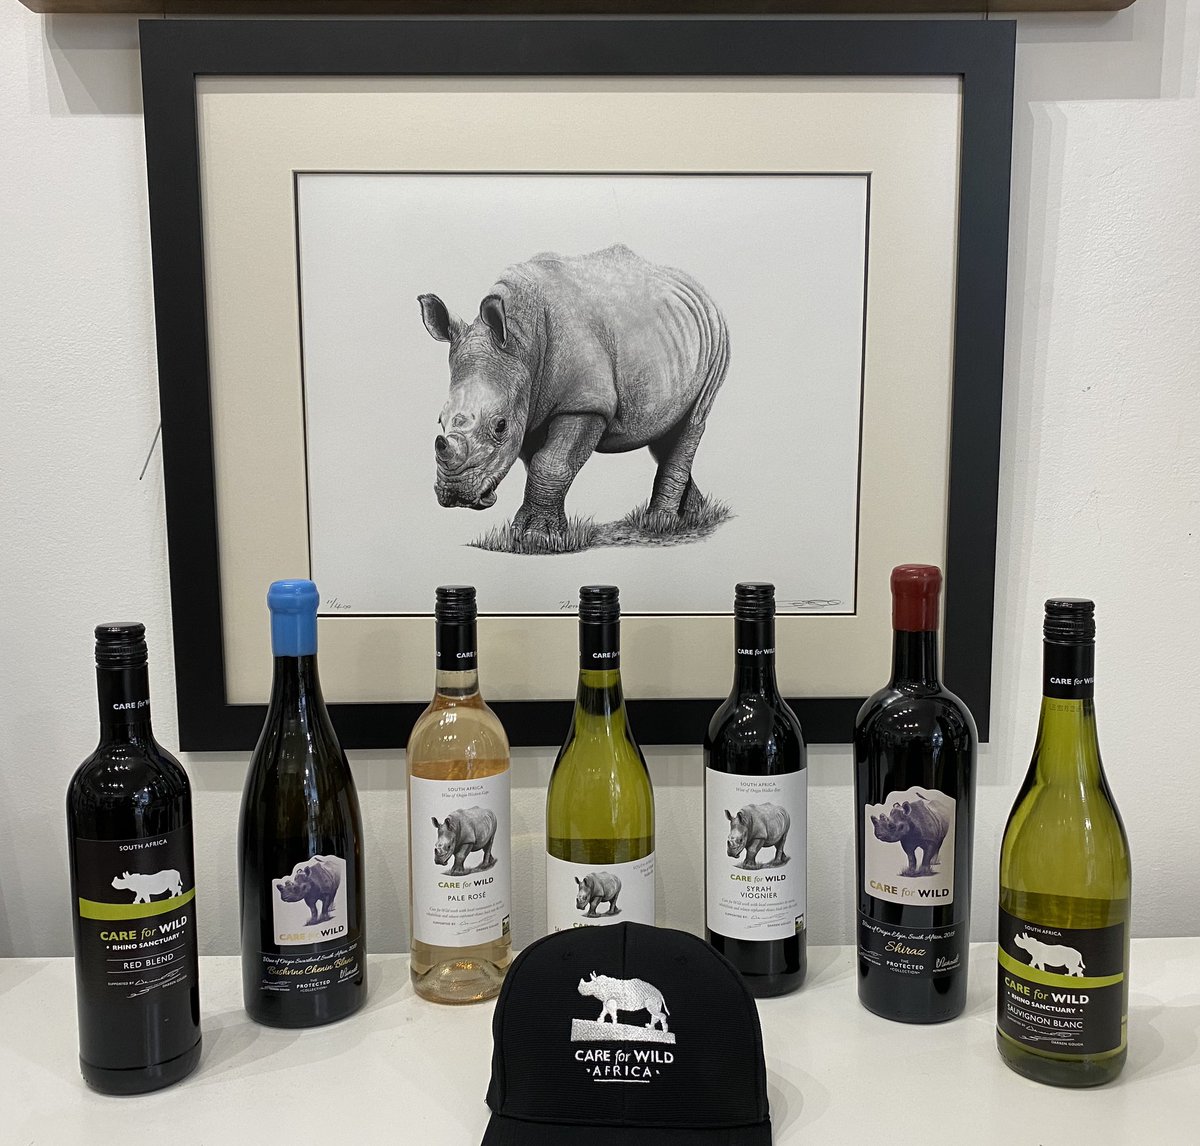 I am very proud to have played a small part in today’s launch of a range of wines in conjunction with @FreixenetUK wines @DGoughie @SlurpWine Jodie Newman and many more - buy the wine or a print of the  #rhinos featured on the labels to support  @careforwild & #WorldRhinoDay